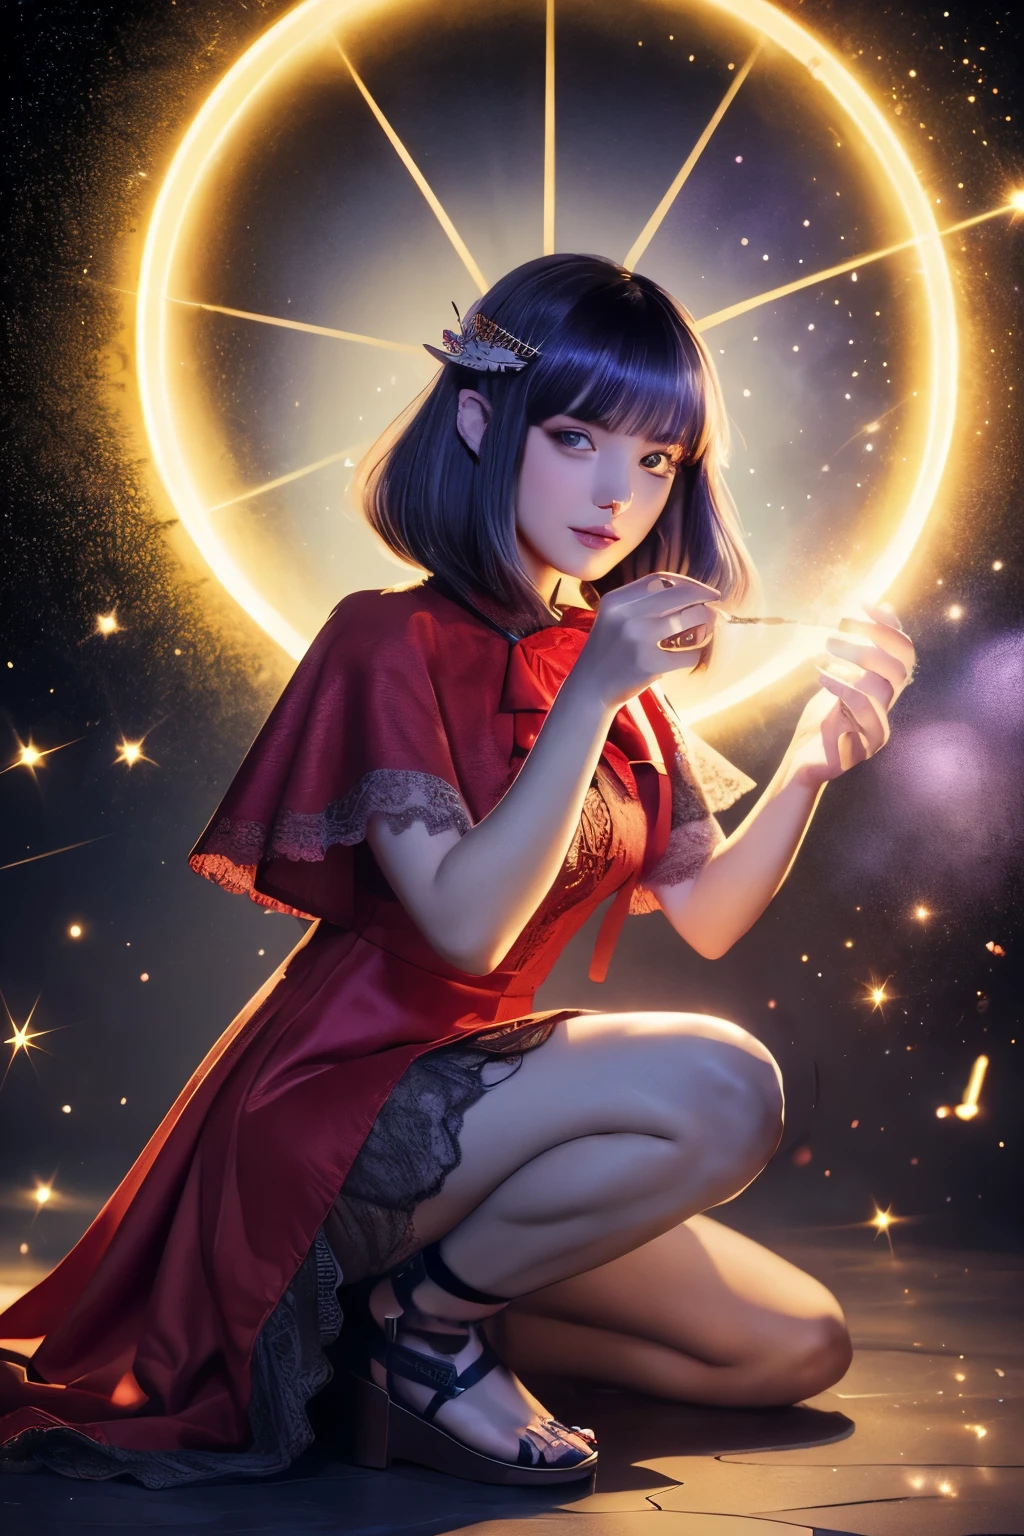 (ultra-detailed face, sleepy eyes:1.5), (Full Body:1.3), (Fantasy Illustration with Gothic & Ukiyo-e & Comic Art:1.2), (A woman magician is kneeling on one knee in the center of the magic circle:1.3), (In one hand she holds a large swirl of light. Particles of light scatter:1.4), (A young-aged dark elf woman with white hair, blunt bangs, bob cut, and dark purple skin, lavender eyes:1.2), BREAK (She is wearing a red linen cape dress with lace ruffles and red sandals:1.2)